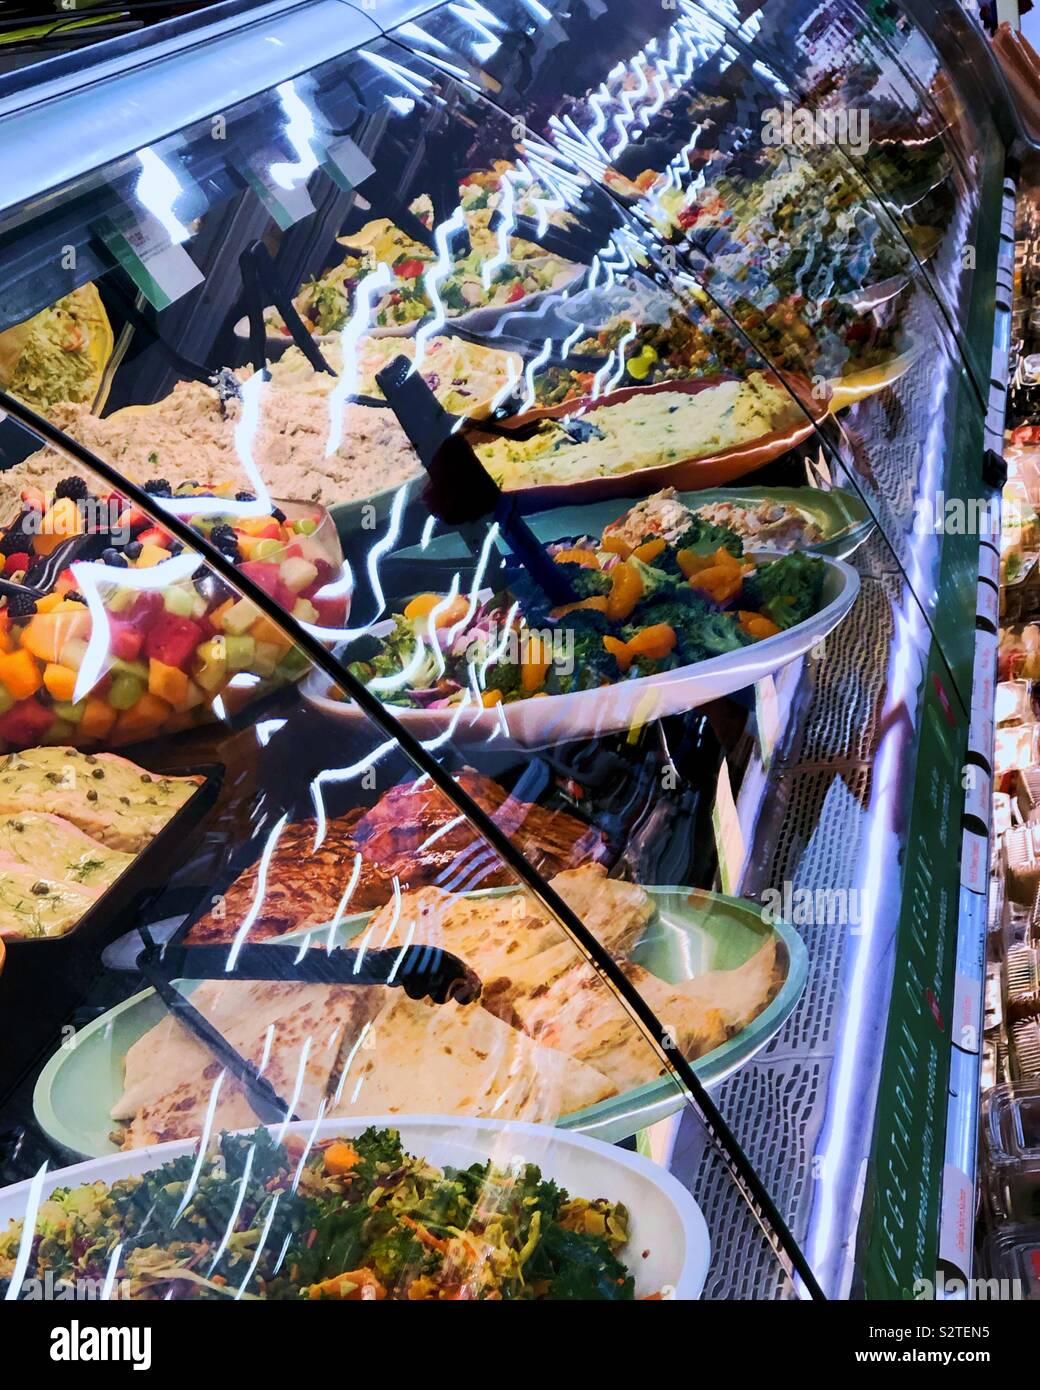 https://c8.alamy.com/comp/S2TEN5/looking-at-the-takeout-salads-at-the-deli-counter-S2TEN5.jpg